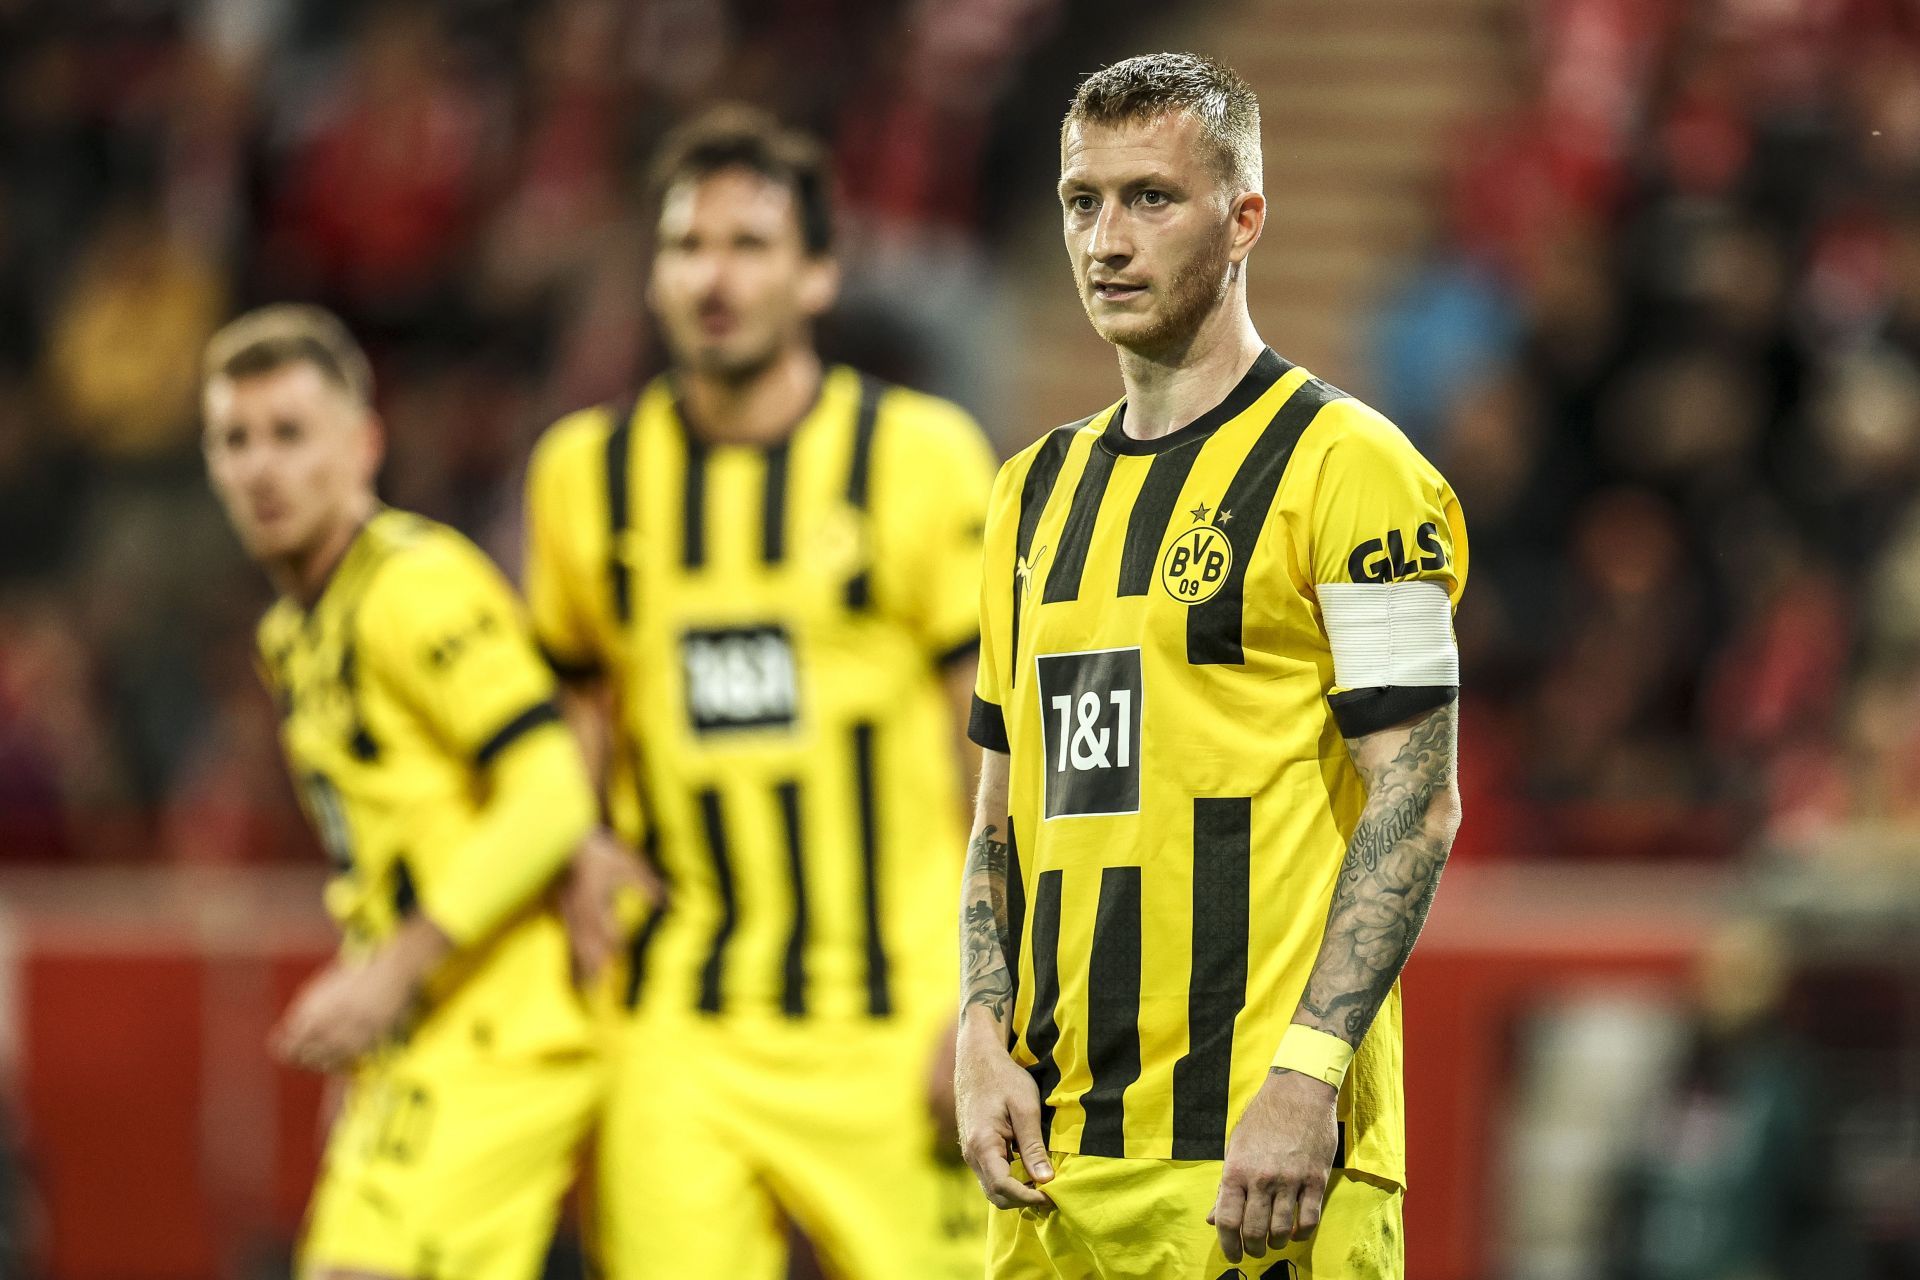 Marco Reus has suffered with injuries in his career.